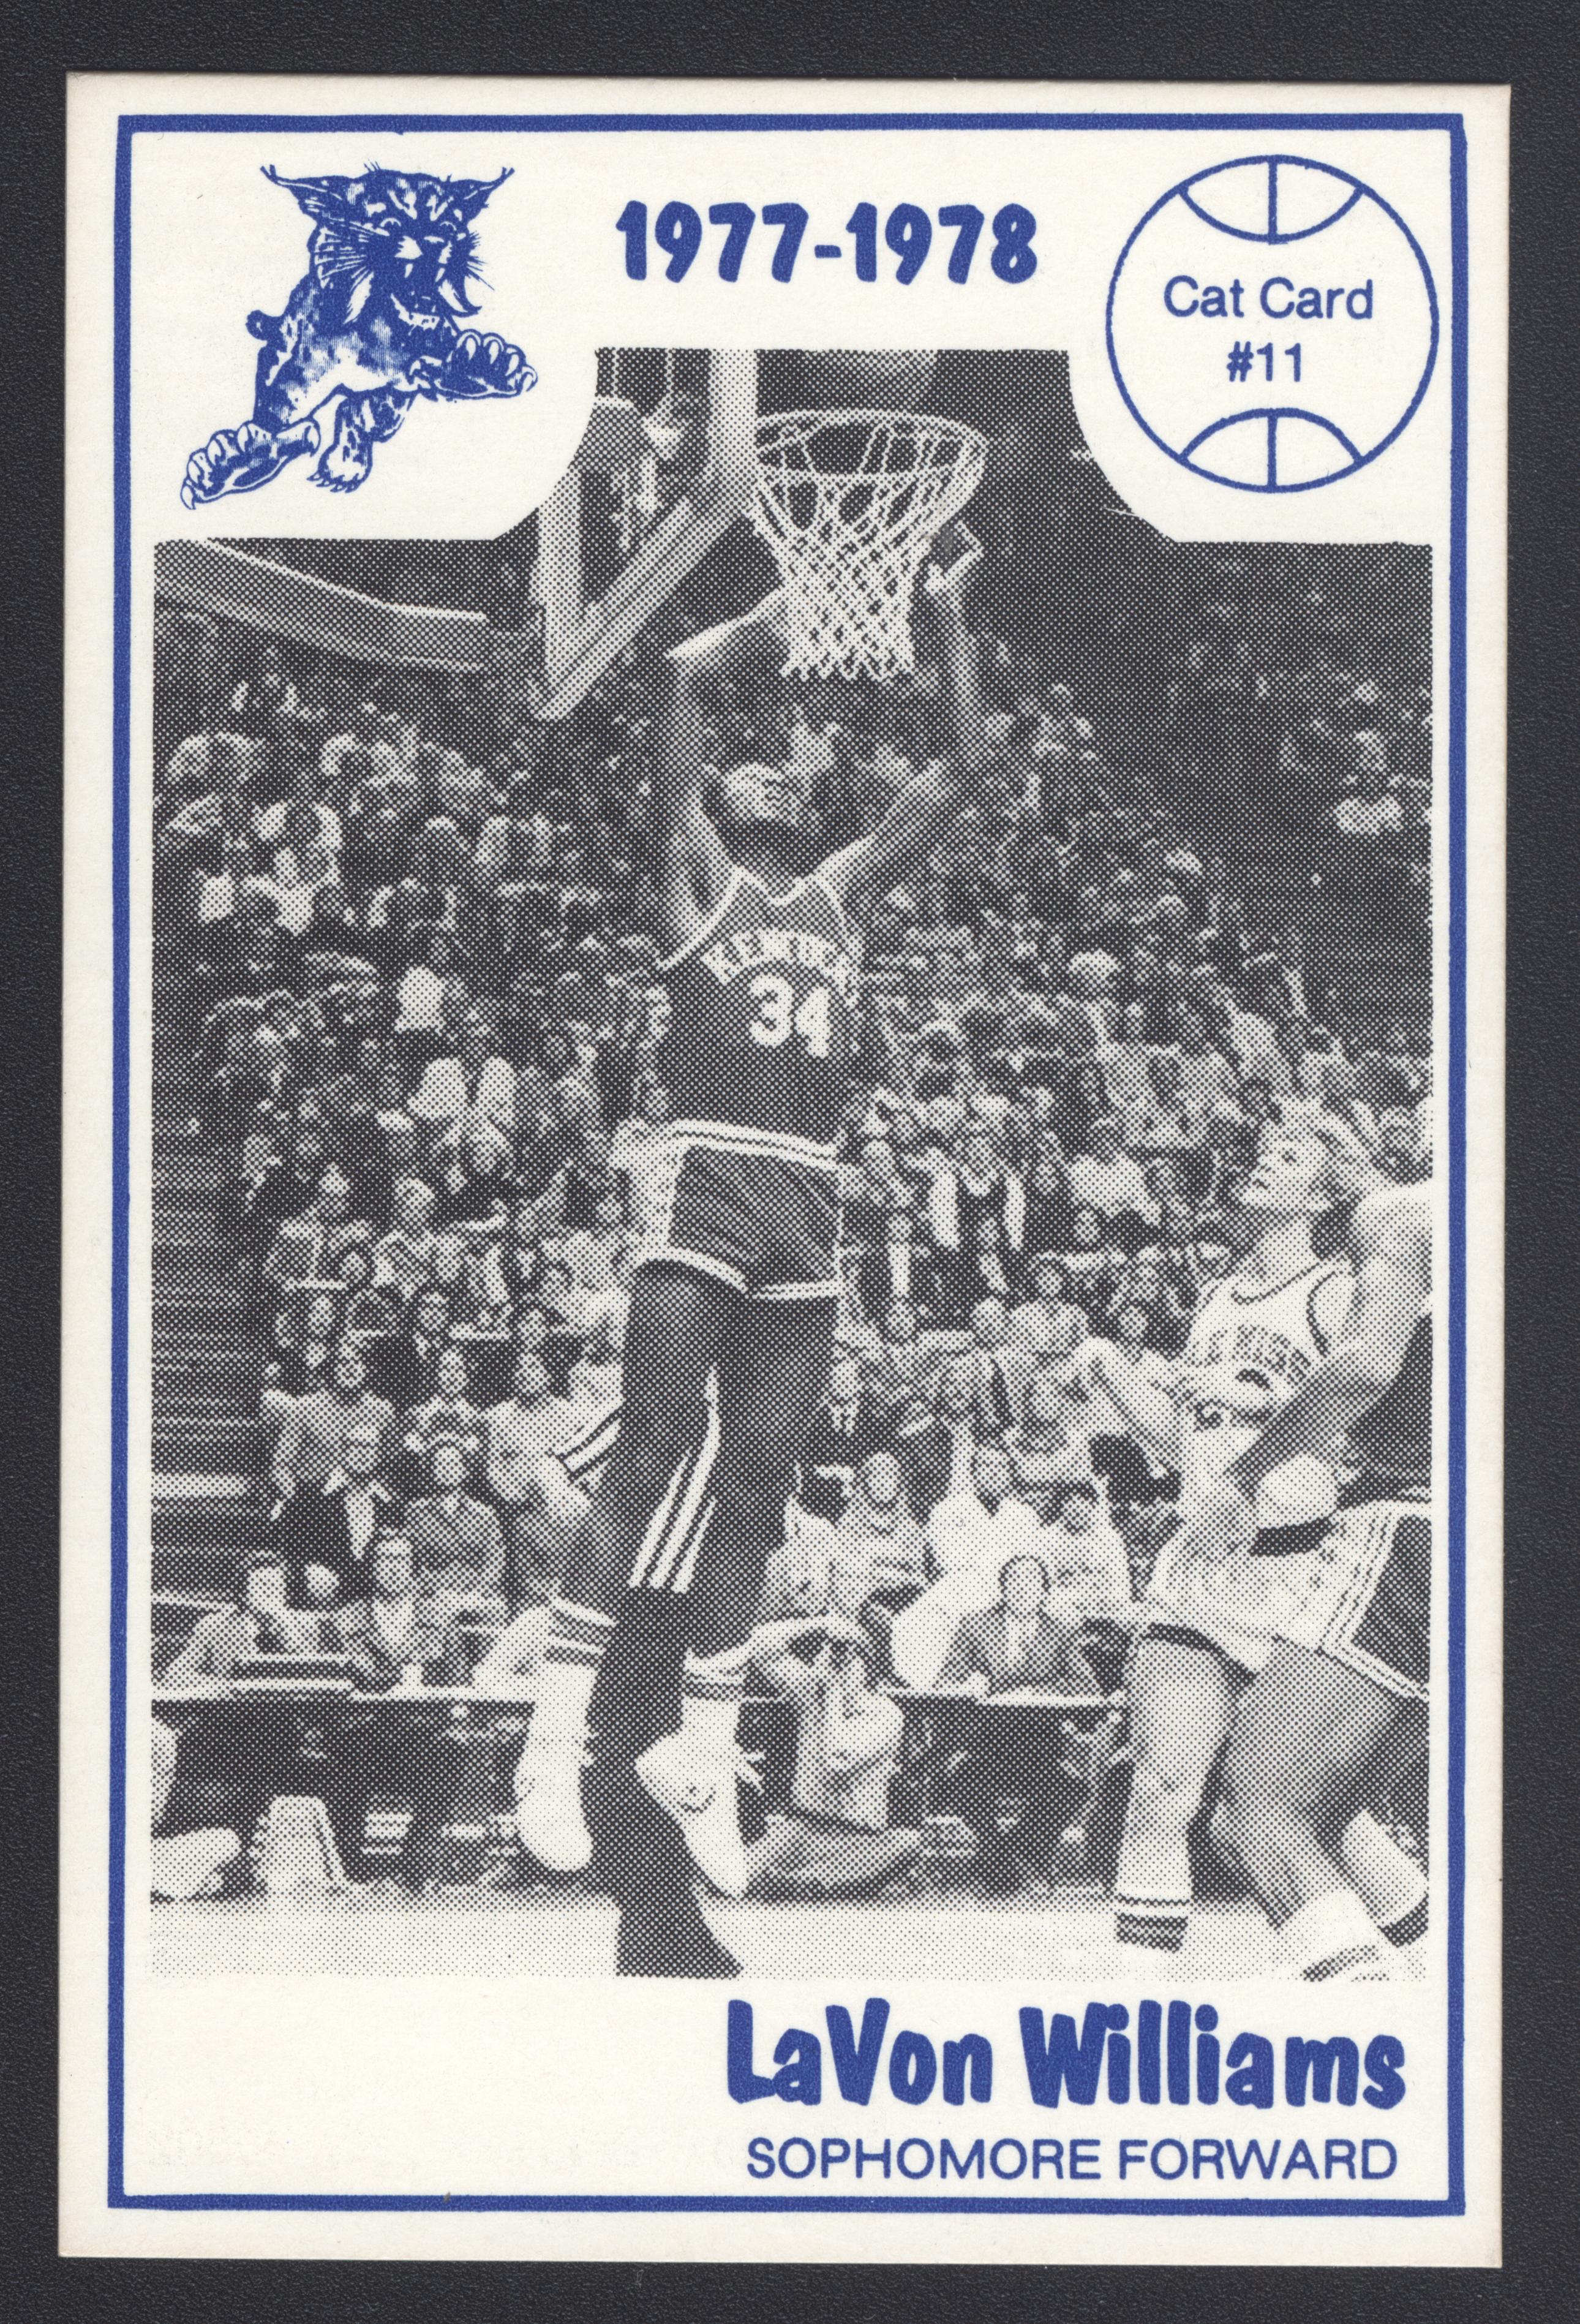 Kenny WalkerSky basketball card (Kentucky Wildcats) 2016 Panini Team  Collection #19 at 's Sports Collectibles Store